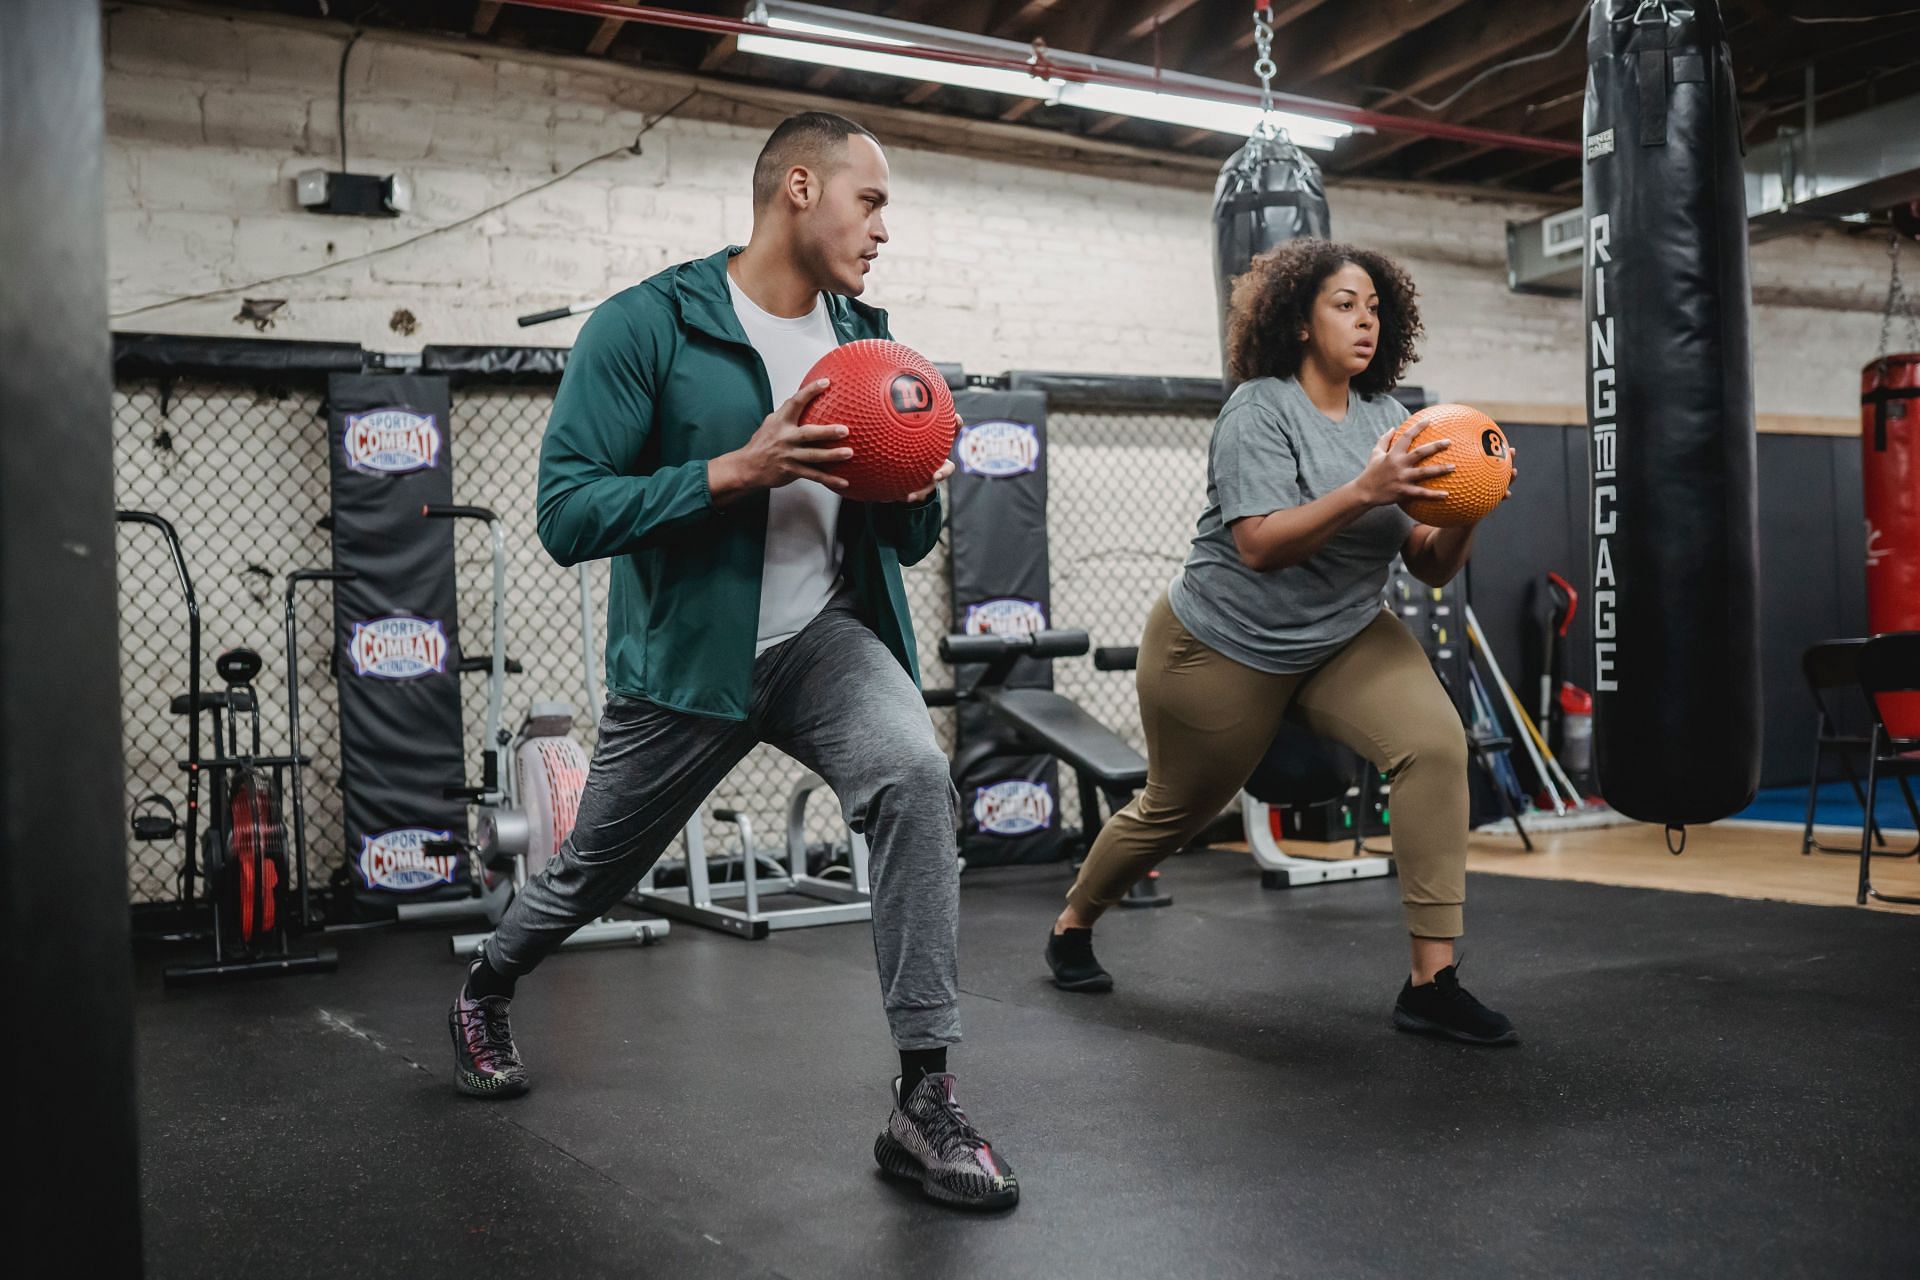 Wallball exercises can also be utilized as warm-up session. (Image via Pexels/ Julia Larson)